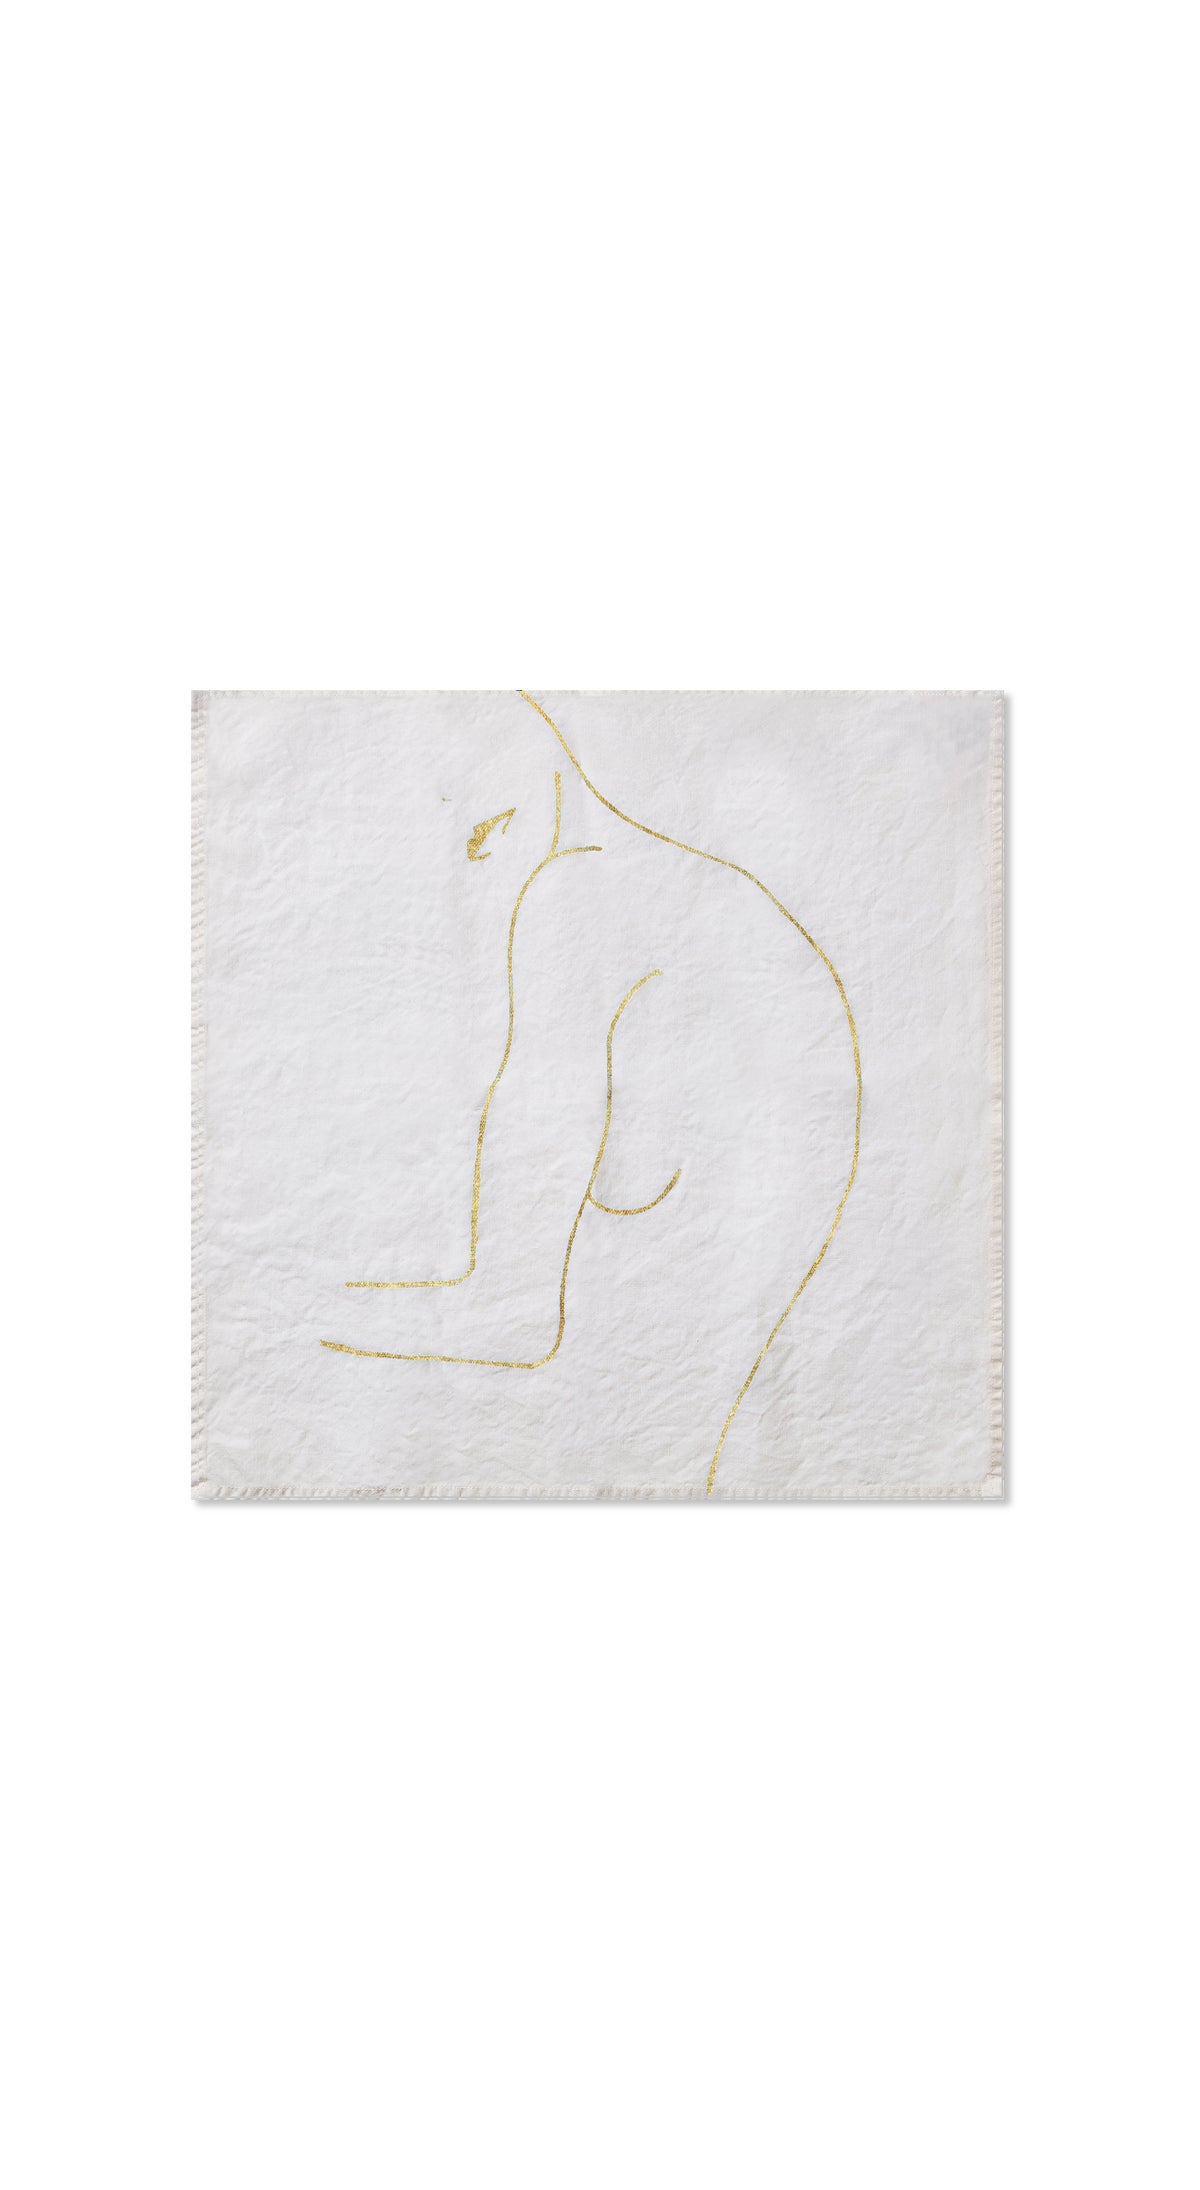 Nude Linen Napkin "Female With Lips" in Gold, 50x50cm